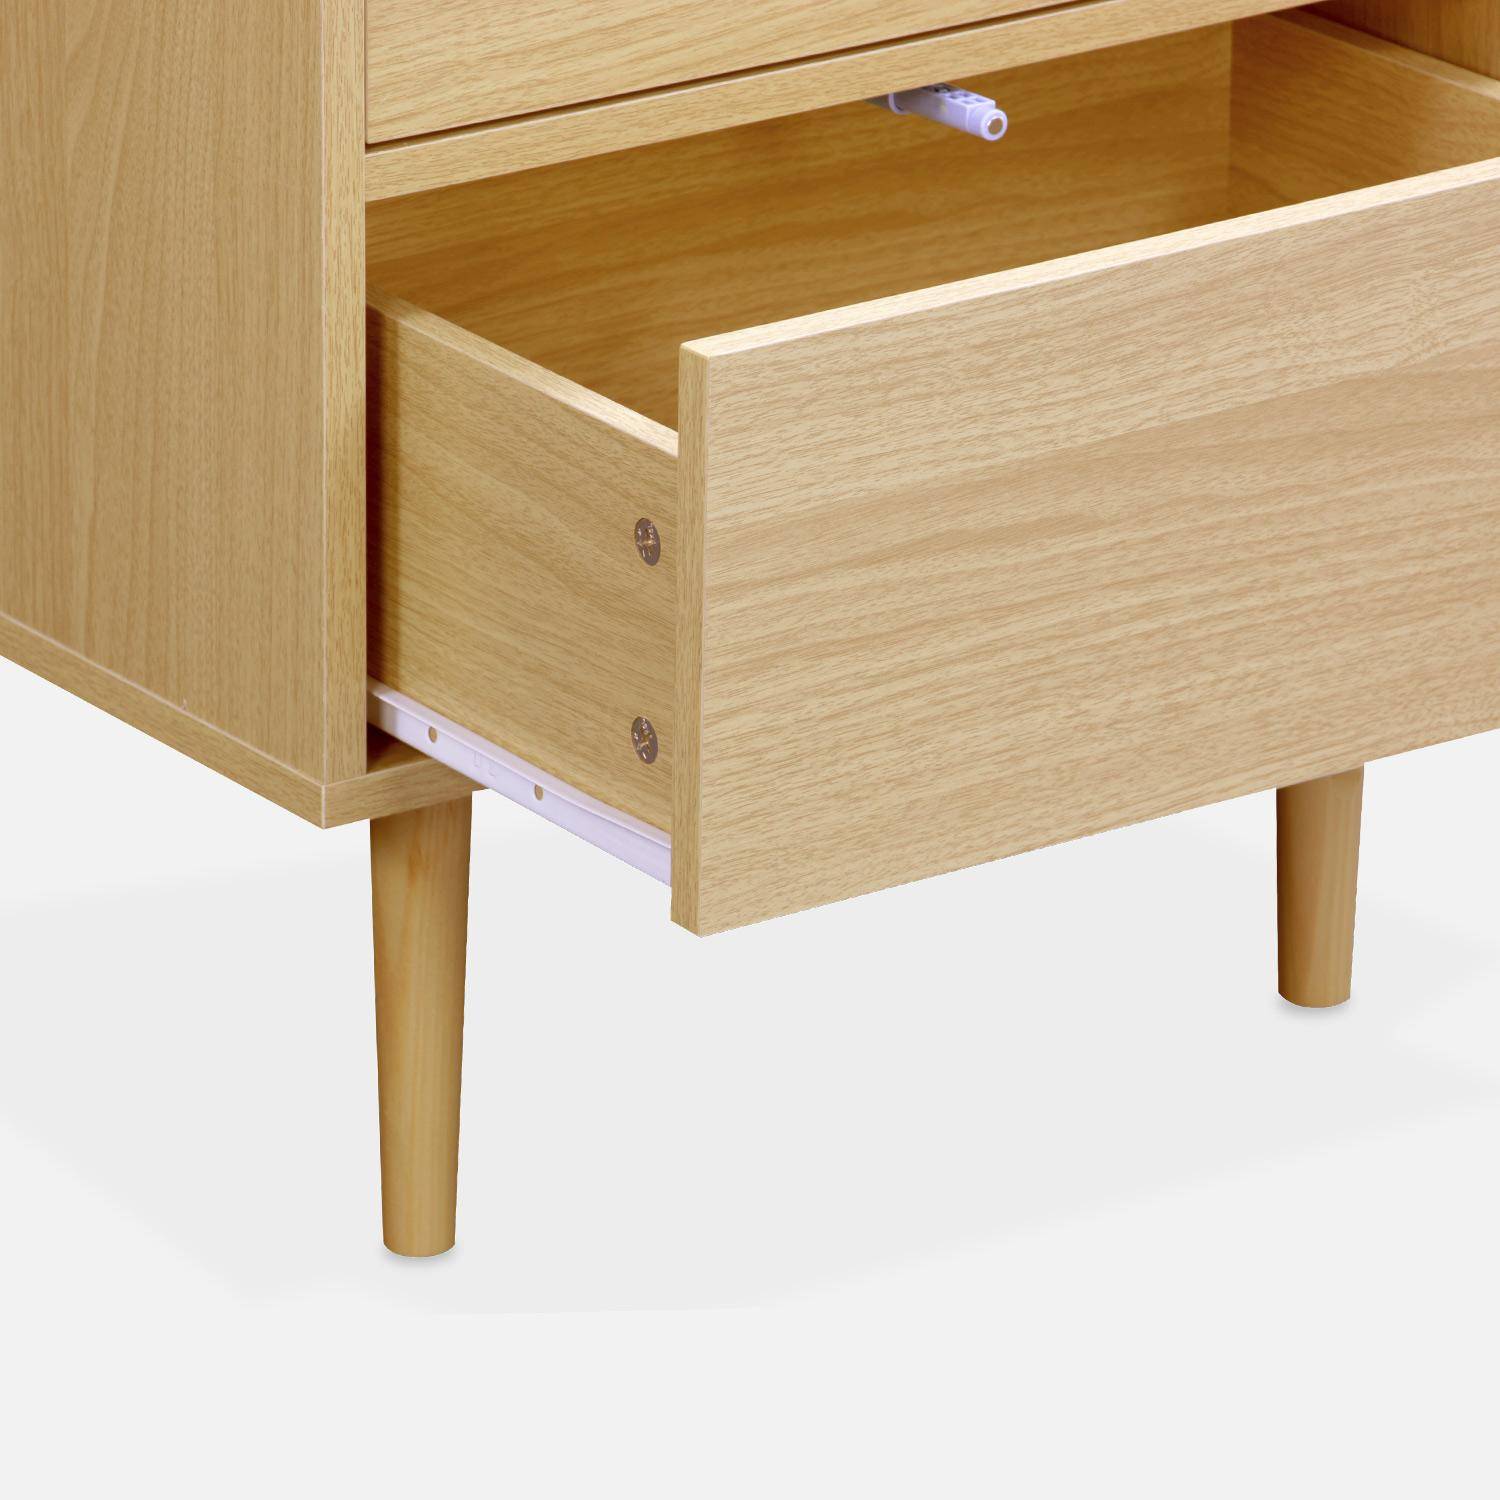 Pair of wood-effect bedside tables with two drawers, 48x40x59cm - Mika - Natural Wood,sweeek,Photo7